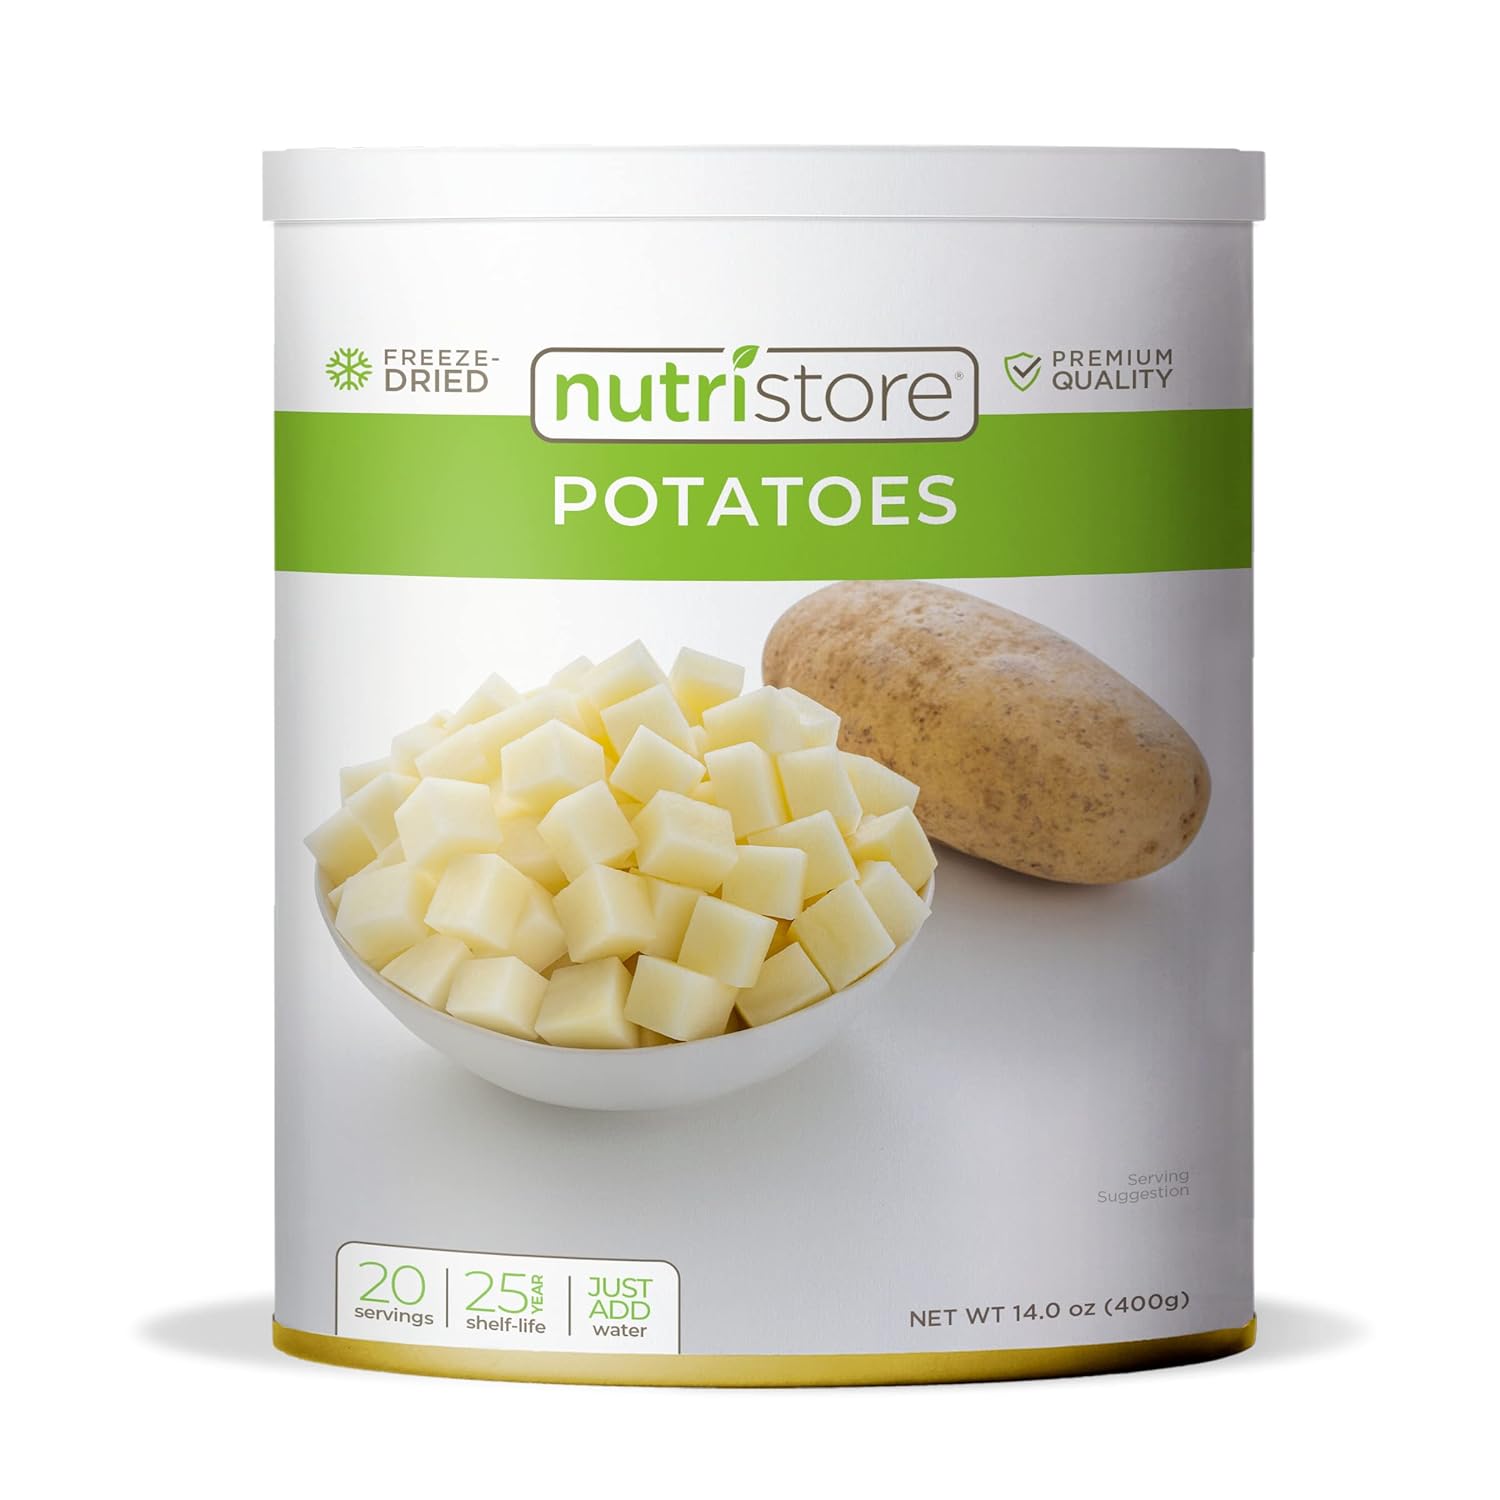 Nutristore Freeze Dried Potatoes | Premium Vegetables for Long Term Storage, Camping Meals or Recipes | Emergency Survival Canned Food Supply | Bulk #10 Can Veggies | 25 Year Shelf Life | 20 Servings